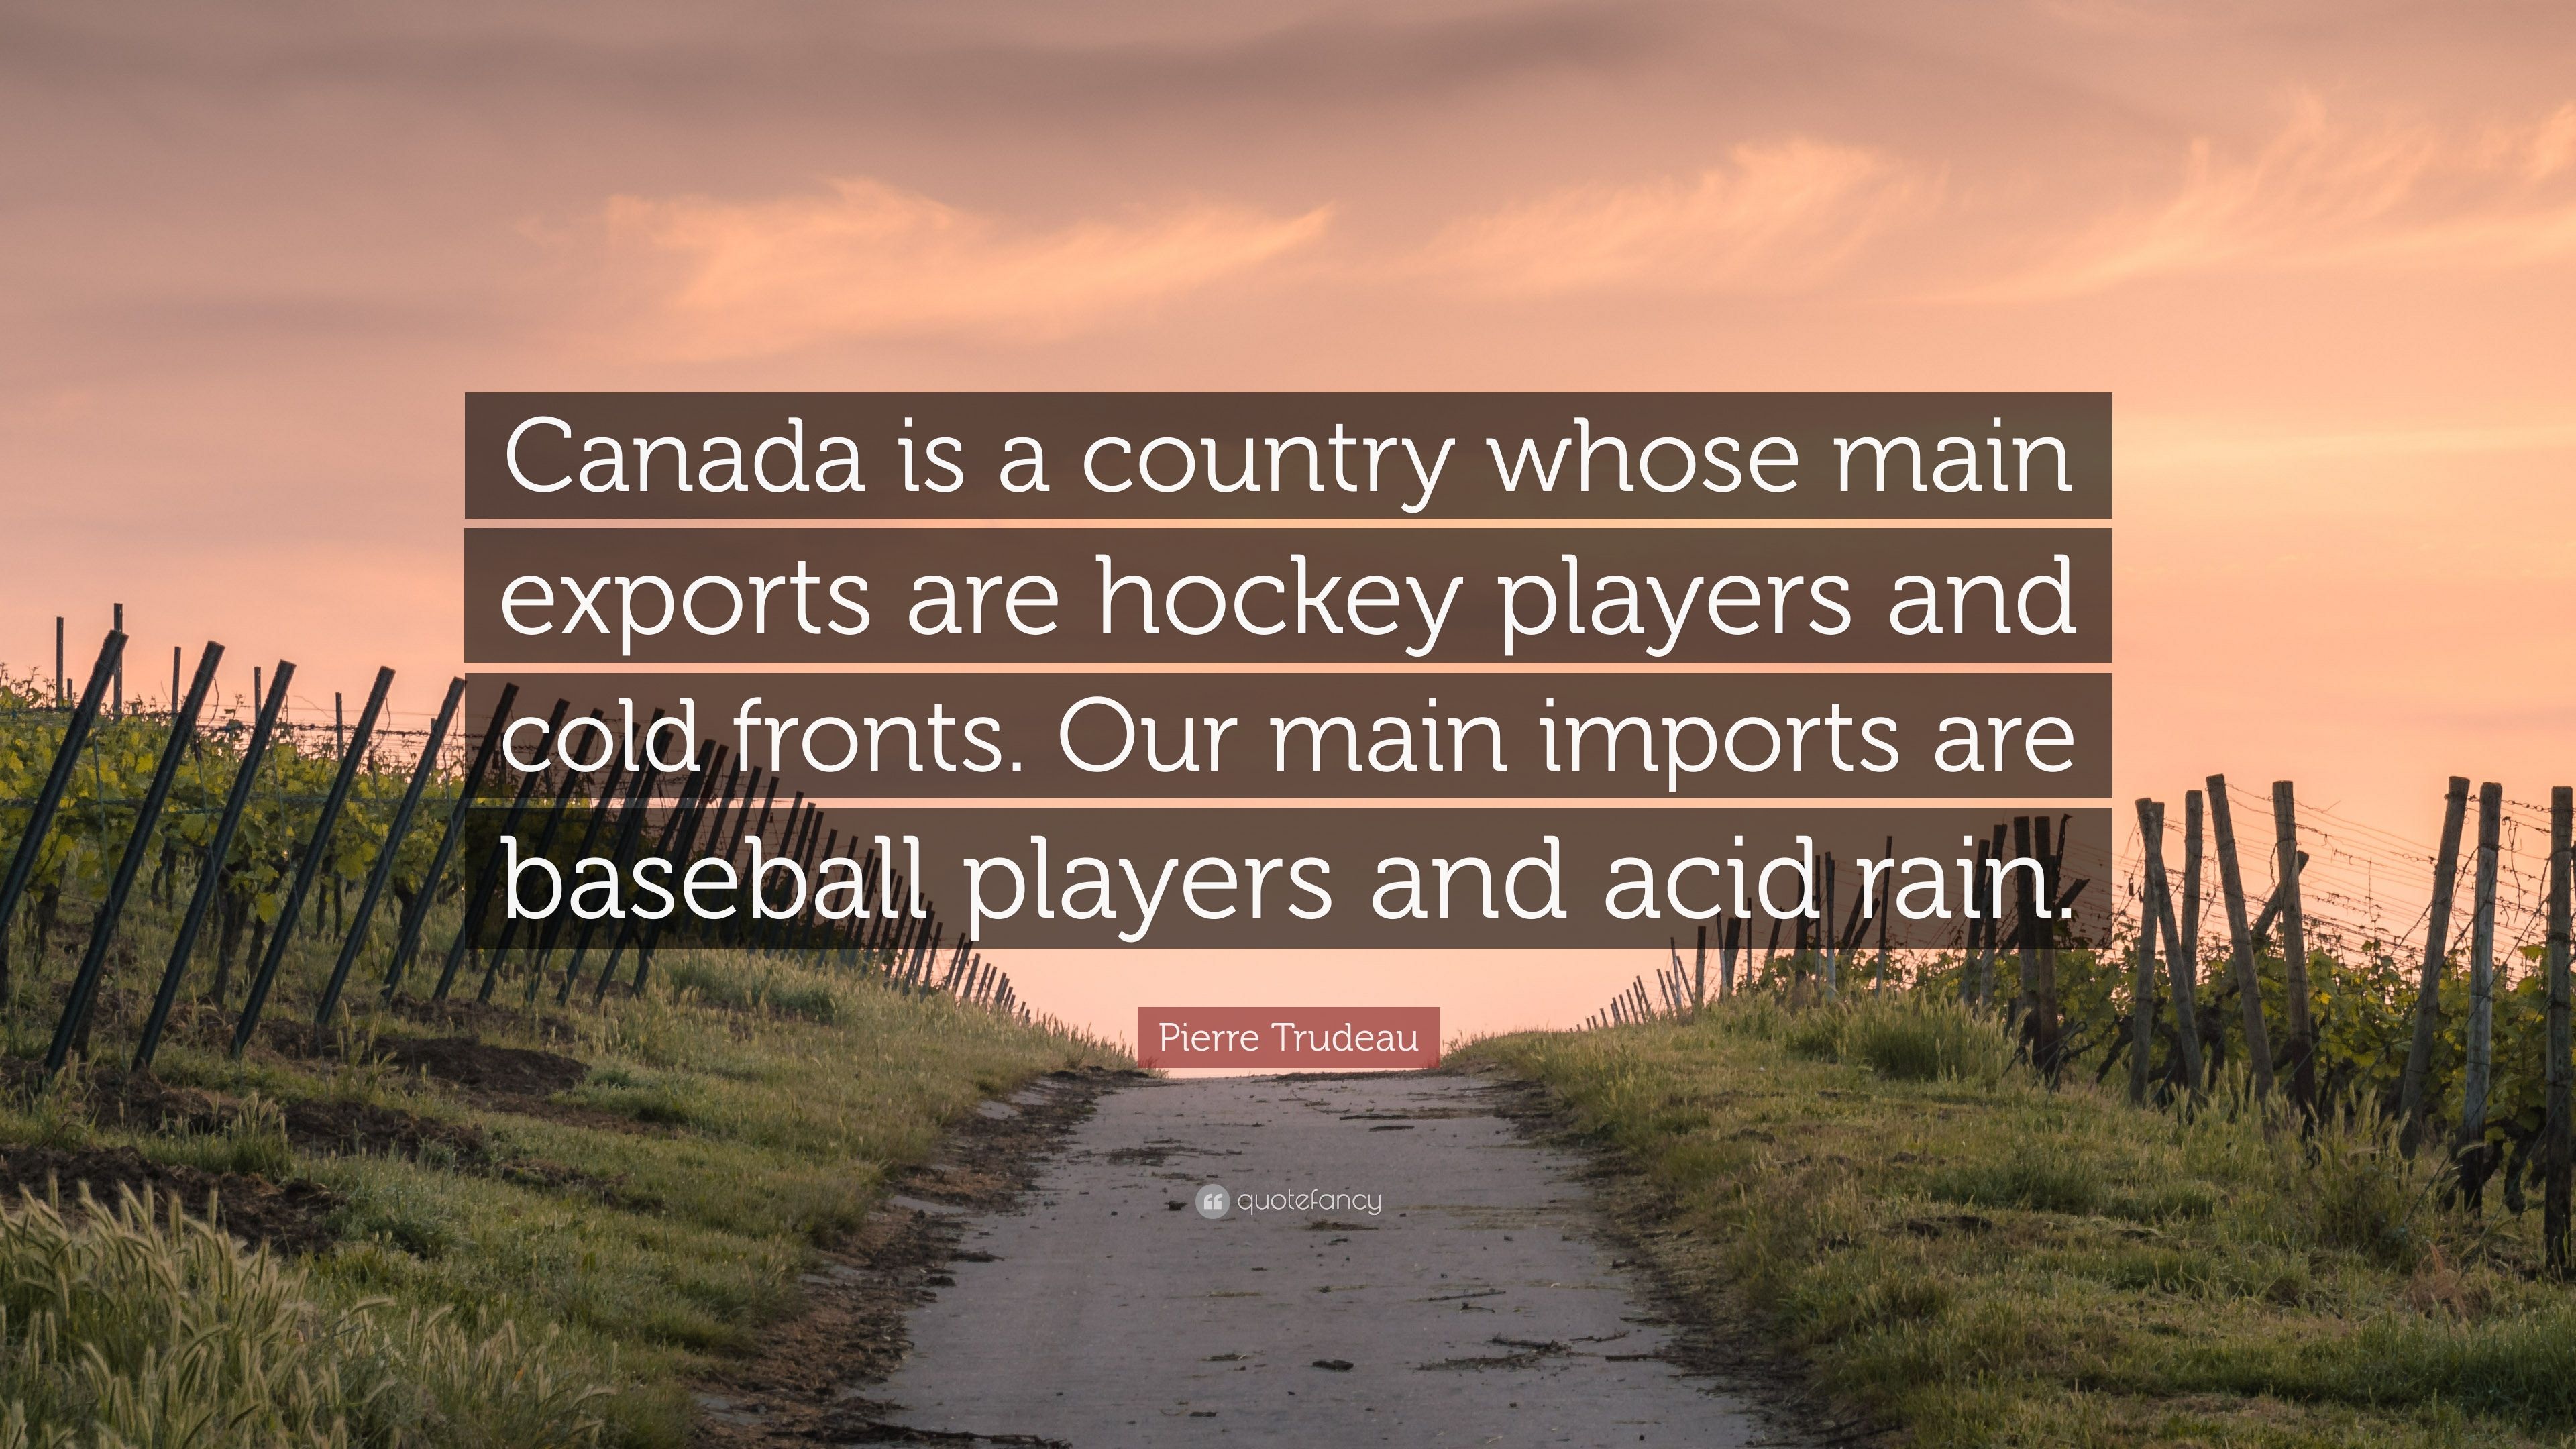 Pierre Trudeau Quote: “Canada is a country whose main exports are hockey players and cold fronts. Our main imports are baseball players and aci.” (7 wallpaper)